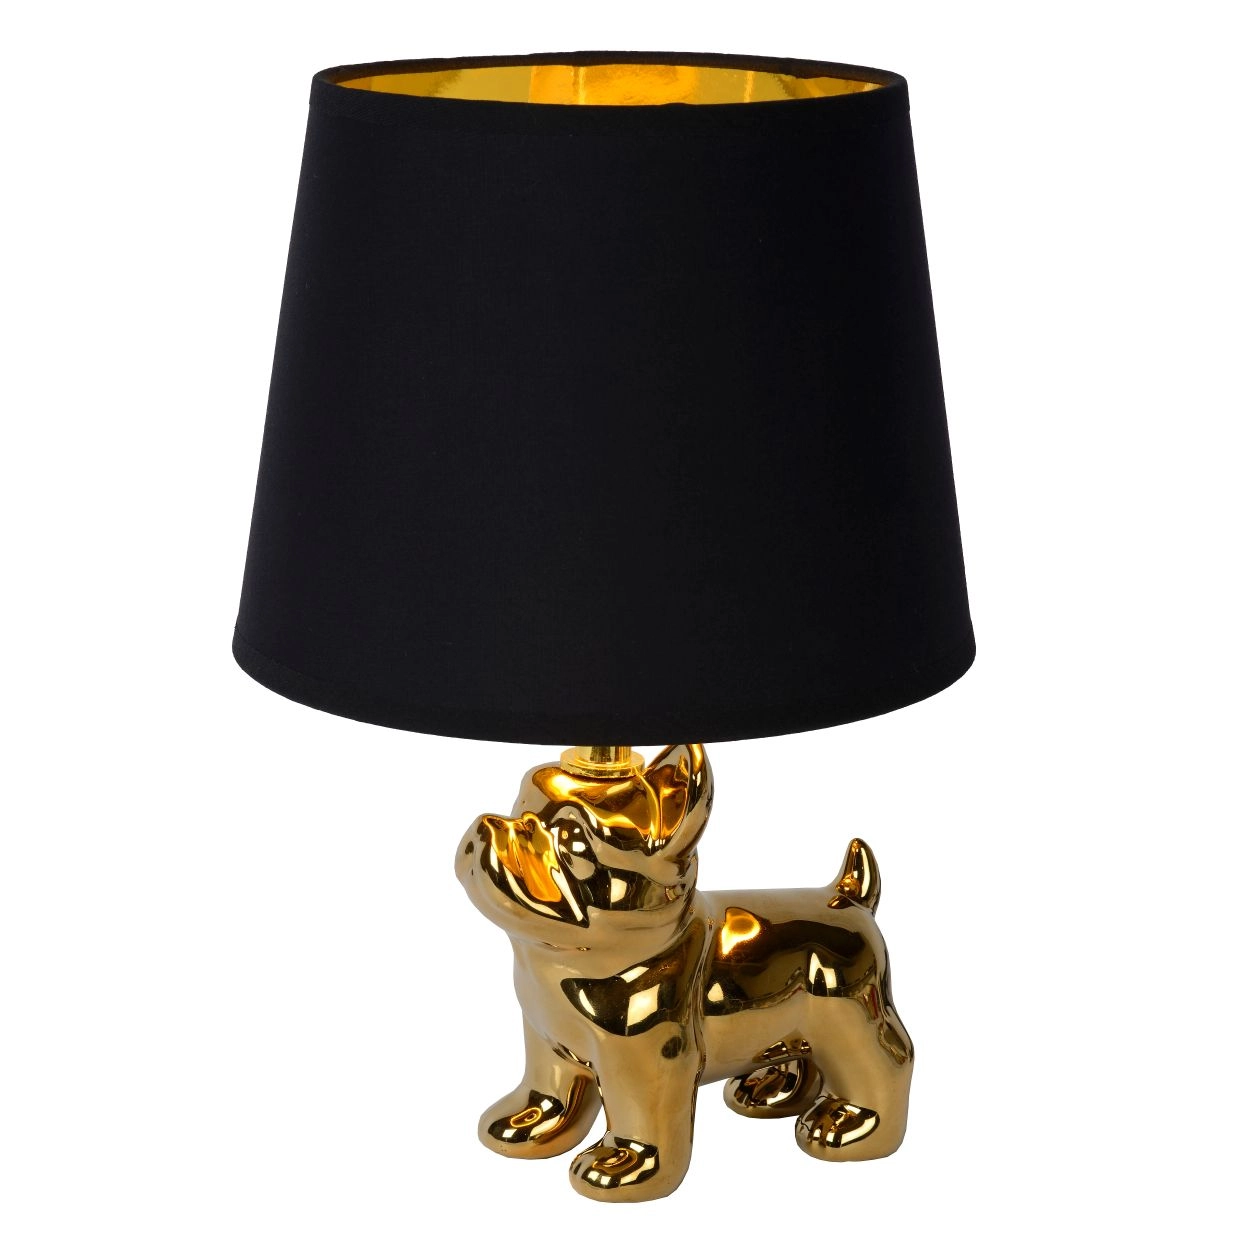 LU 13533/81/10 Lucide EXTRAVAGANZA SIR WINSTON - Table lamp - 1xE14 - Gold